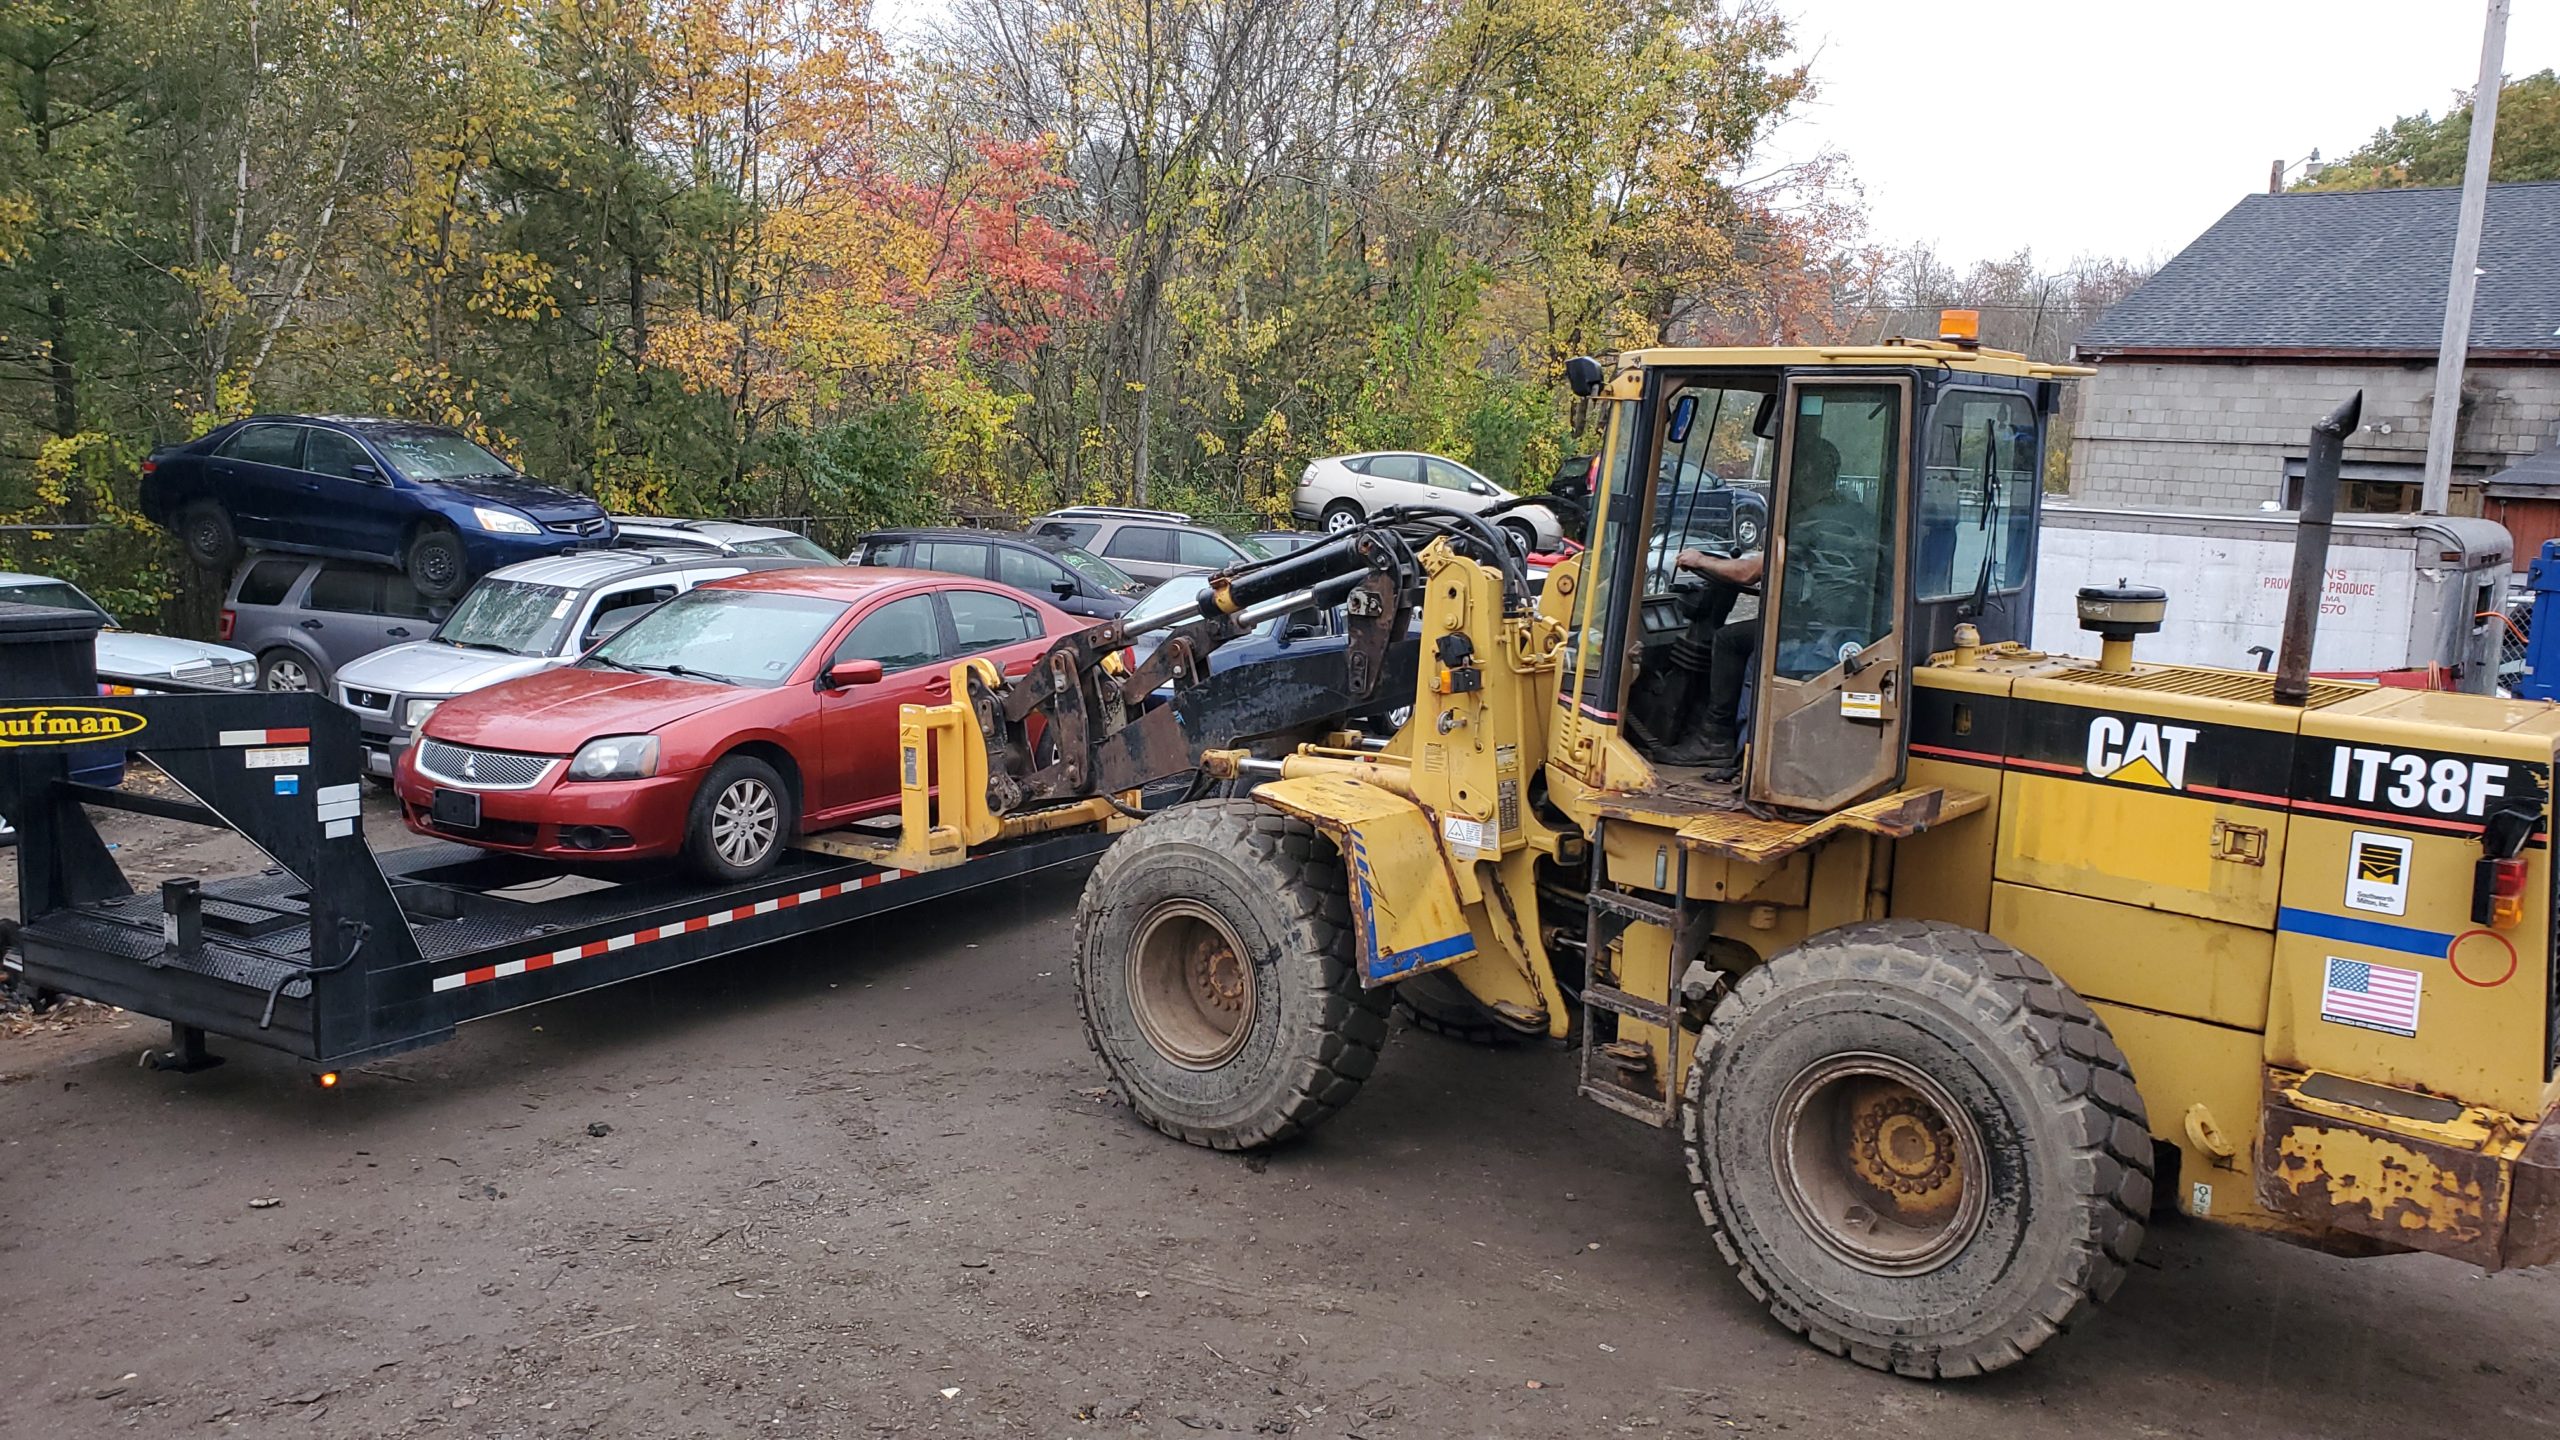 At JUNKAR NINJA, this is a free of cost service. So rest assured, you will have a great deal with the leading car scrap yards near Lynn MA.